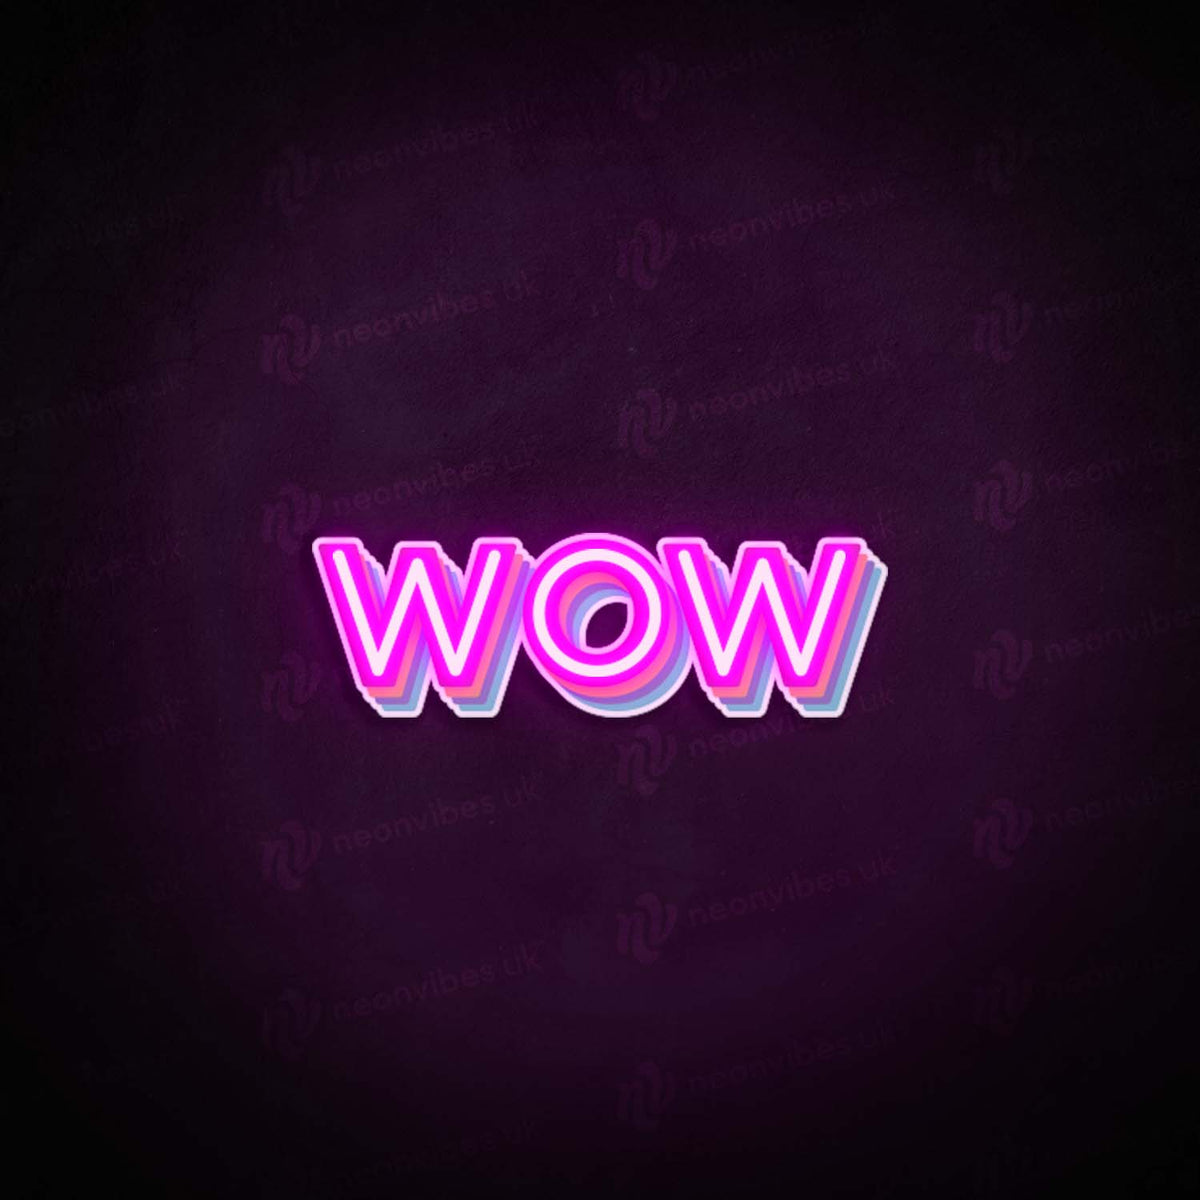 Wow neon sign